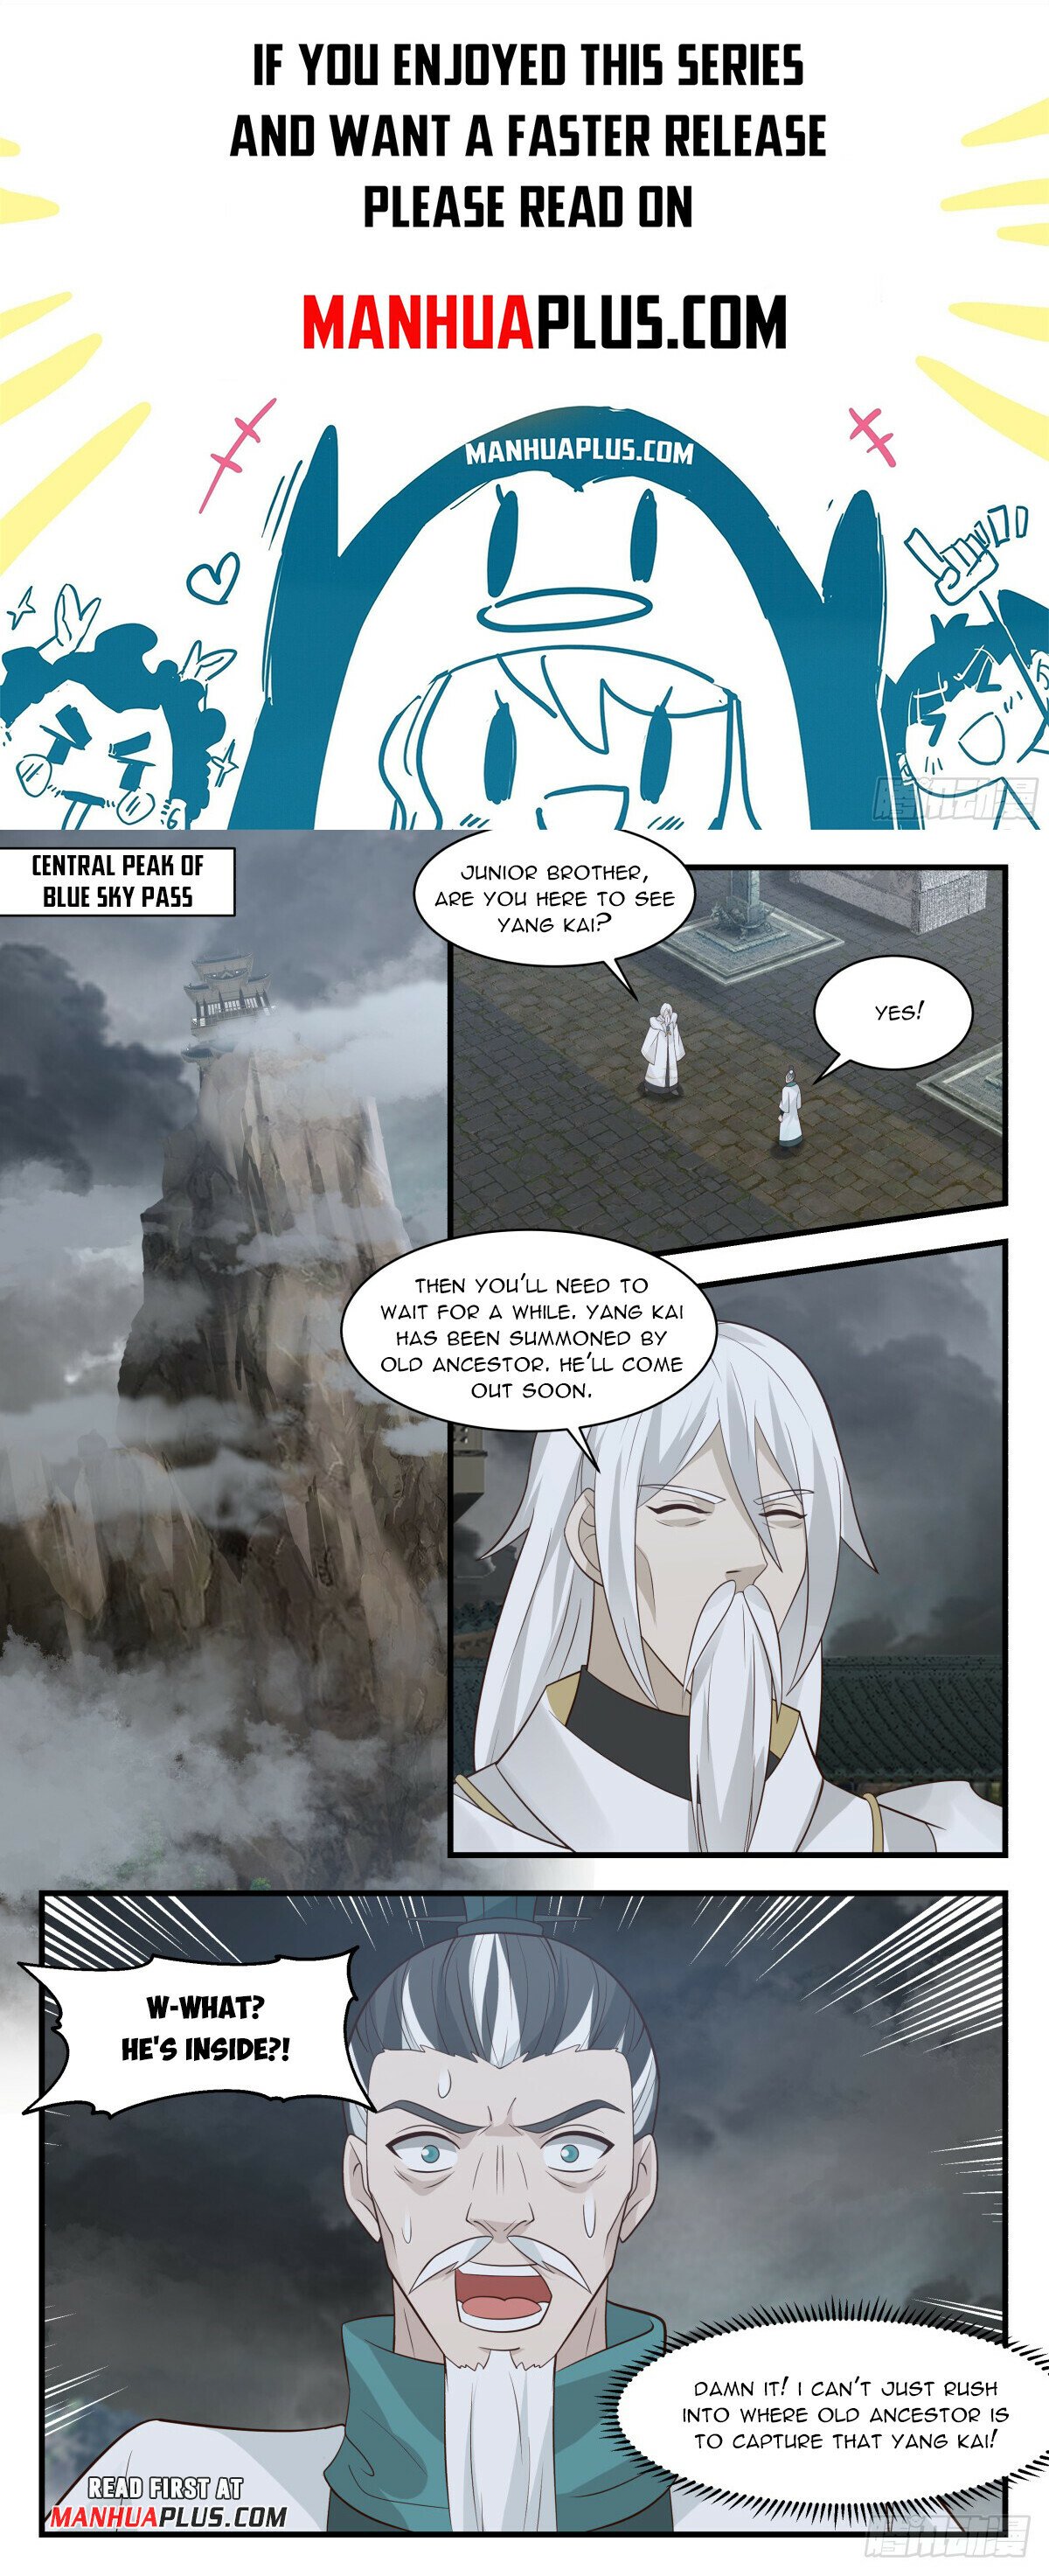 Martial Peak - Chapter 22331 - Summoned By The Old Ancestor - Image 1